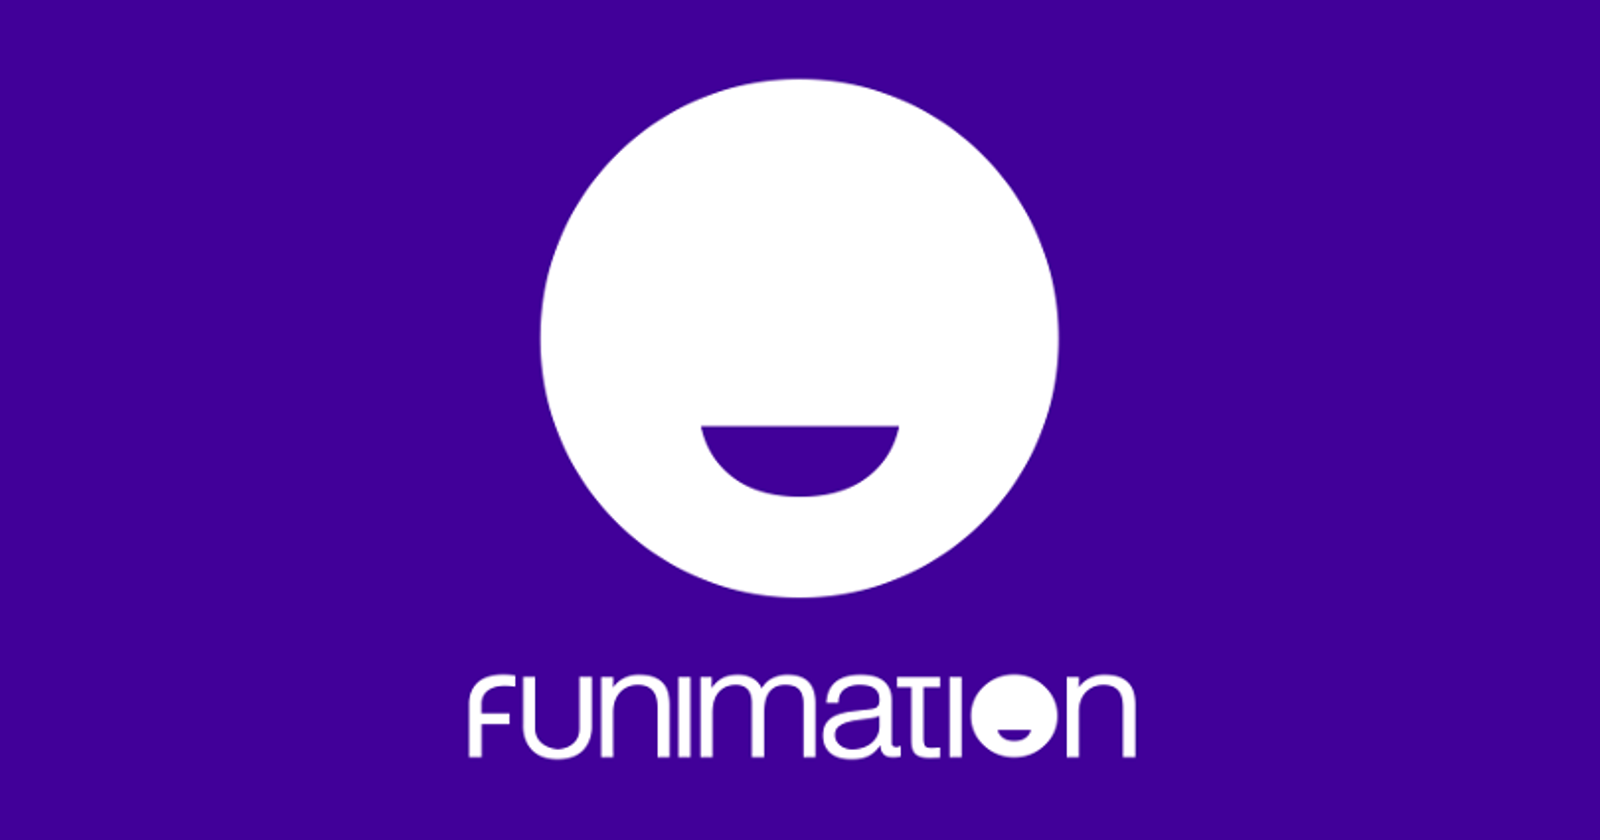 Funimation Library Moving To Crunchyroll, Funimation Global Rebranding   AFA: Animation For Adults : Animation News, Reviews, Articles, Podcasts and  More